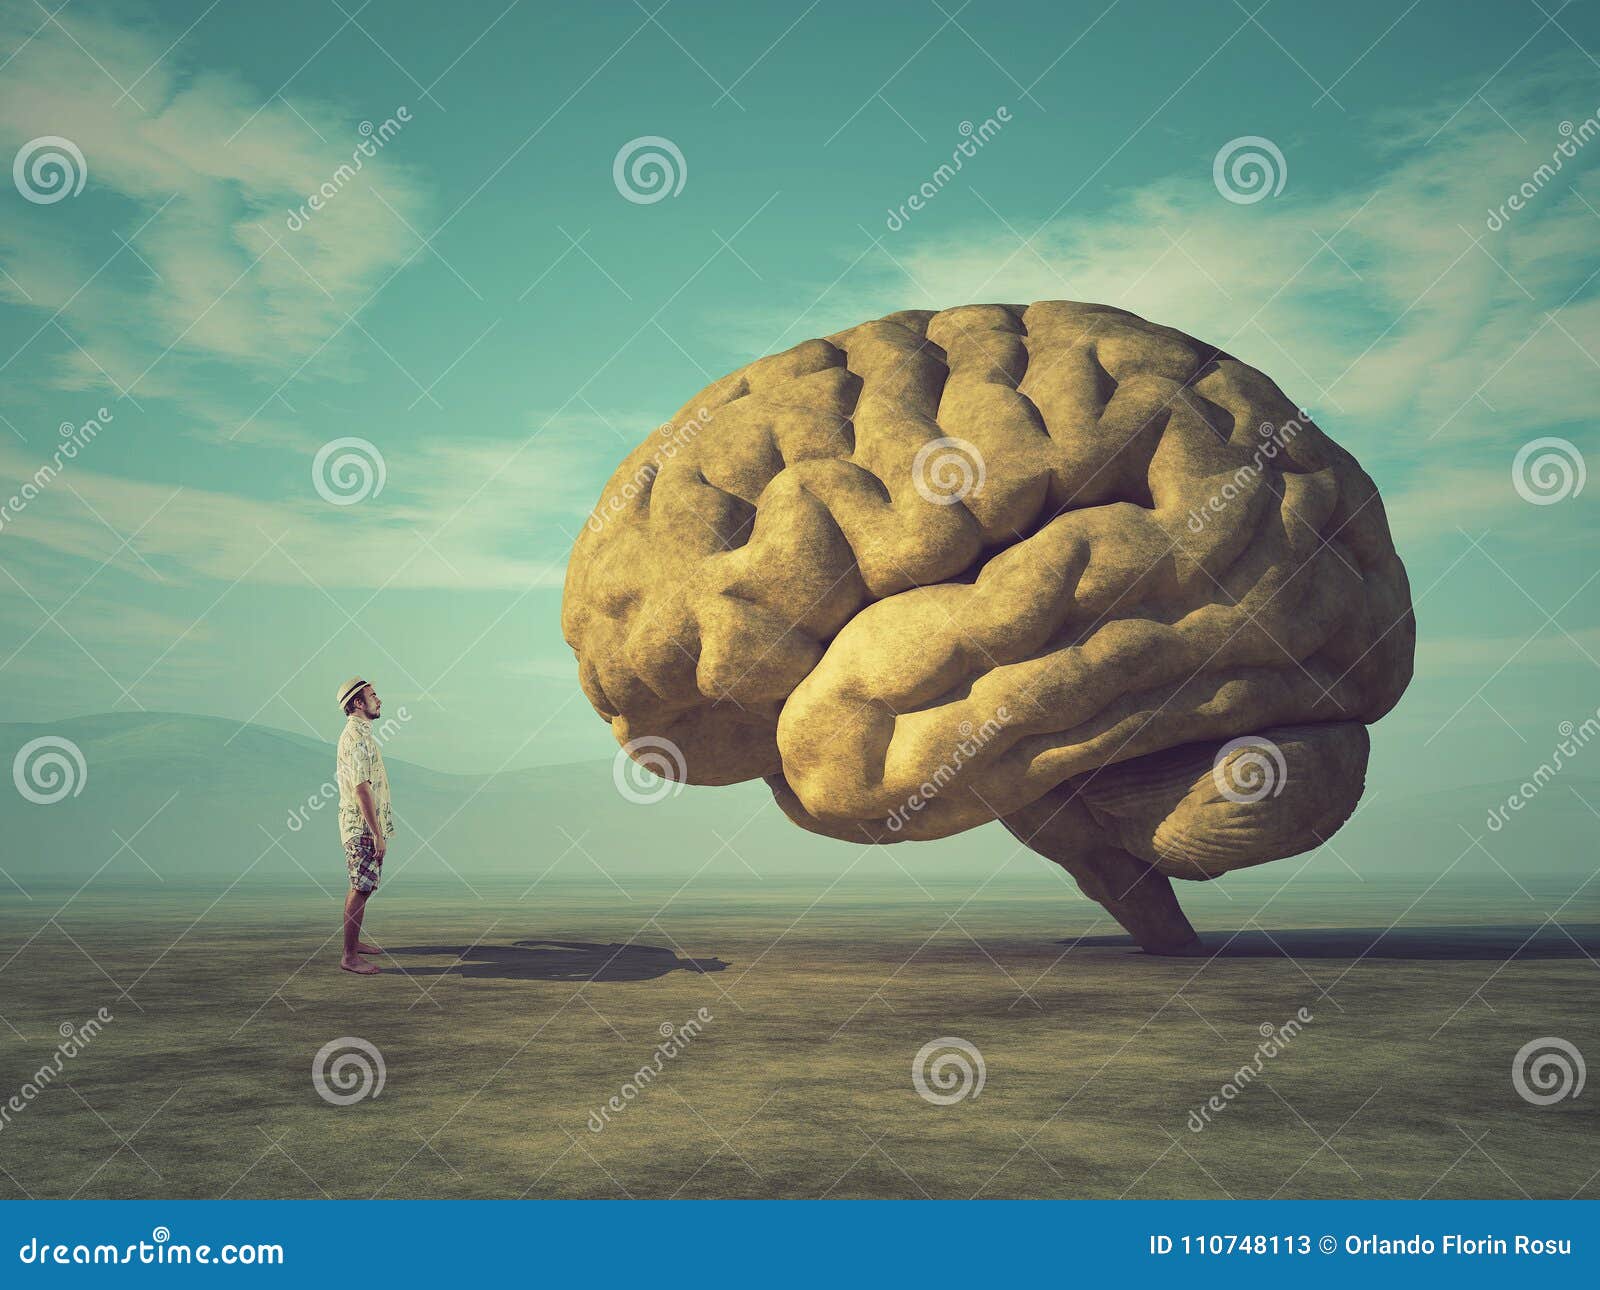 conceptual image of a large stone in the  of the human brain